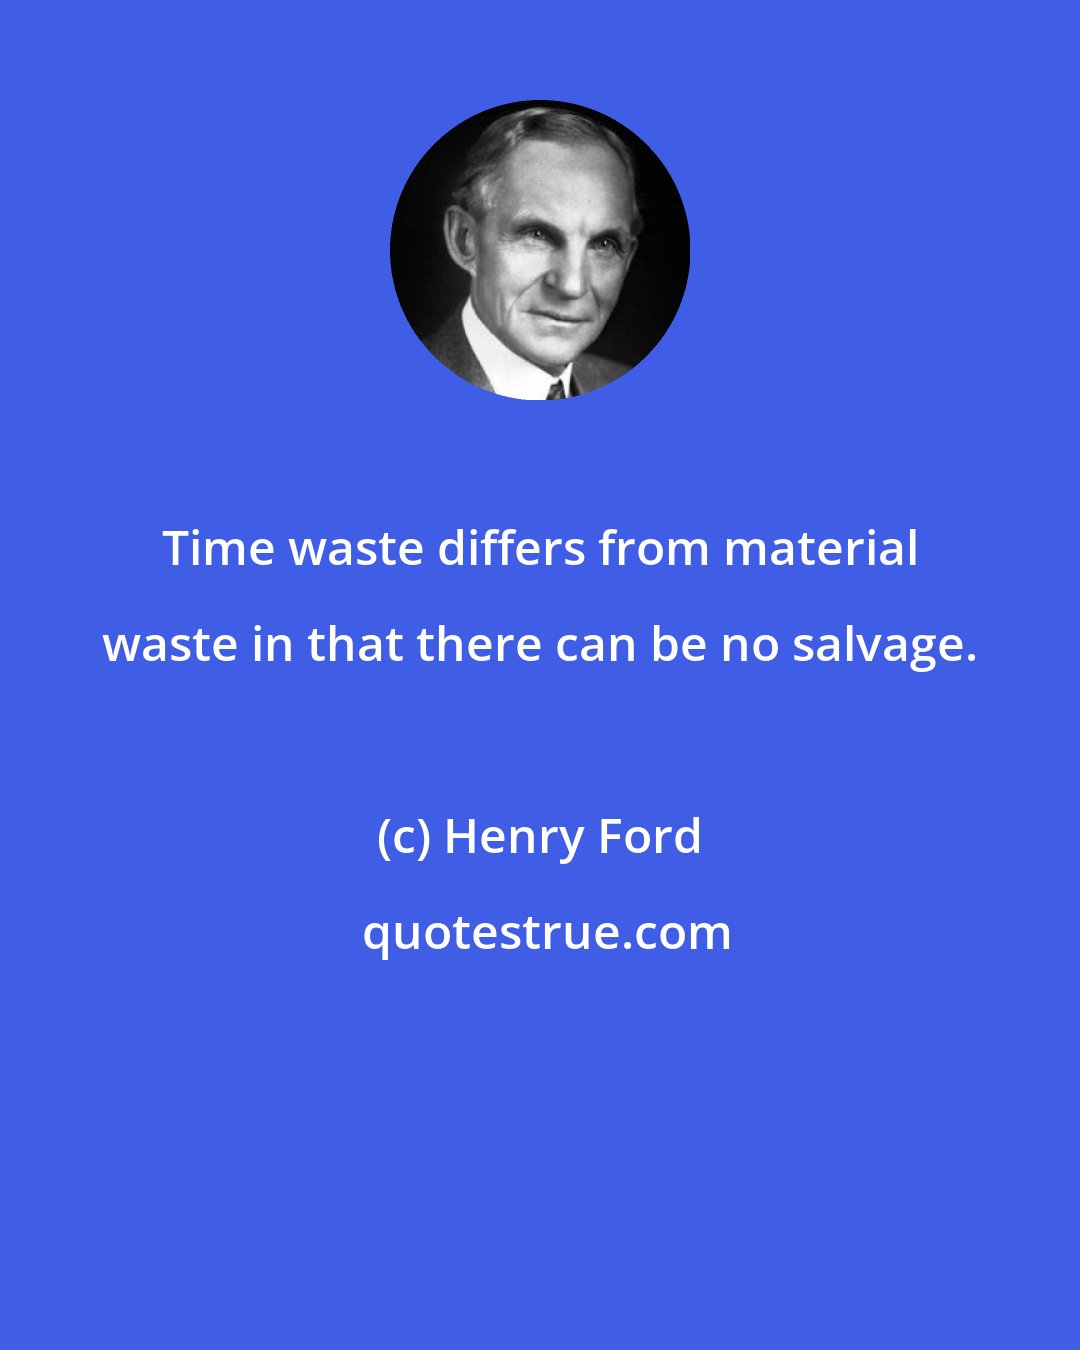 Henry Ford: Time waste differs from material waste in that there can be no salvage.